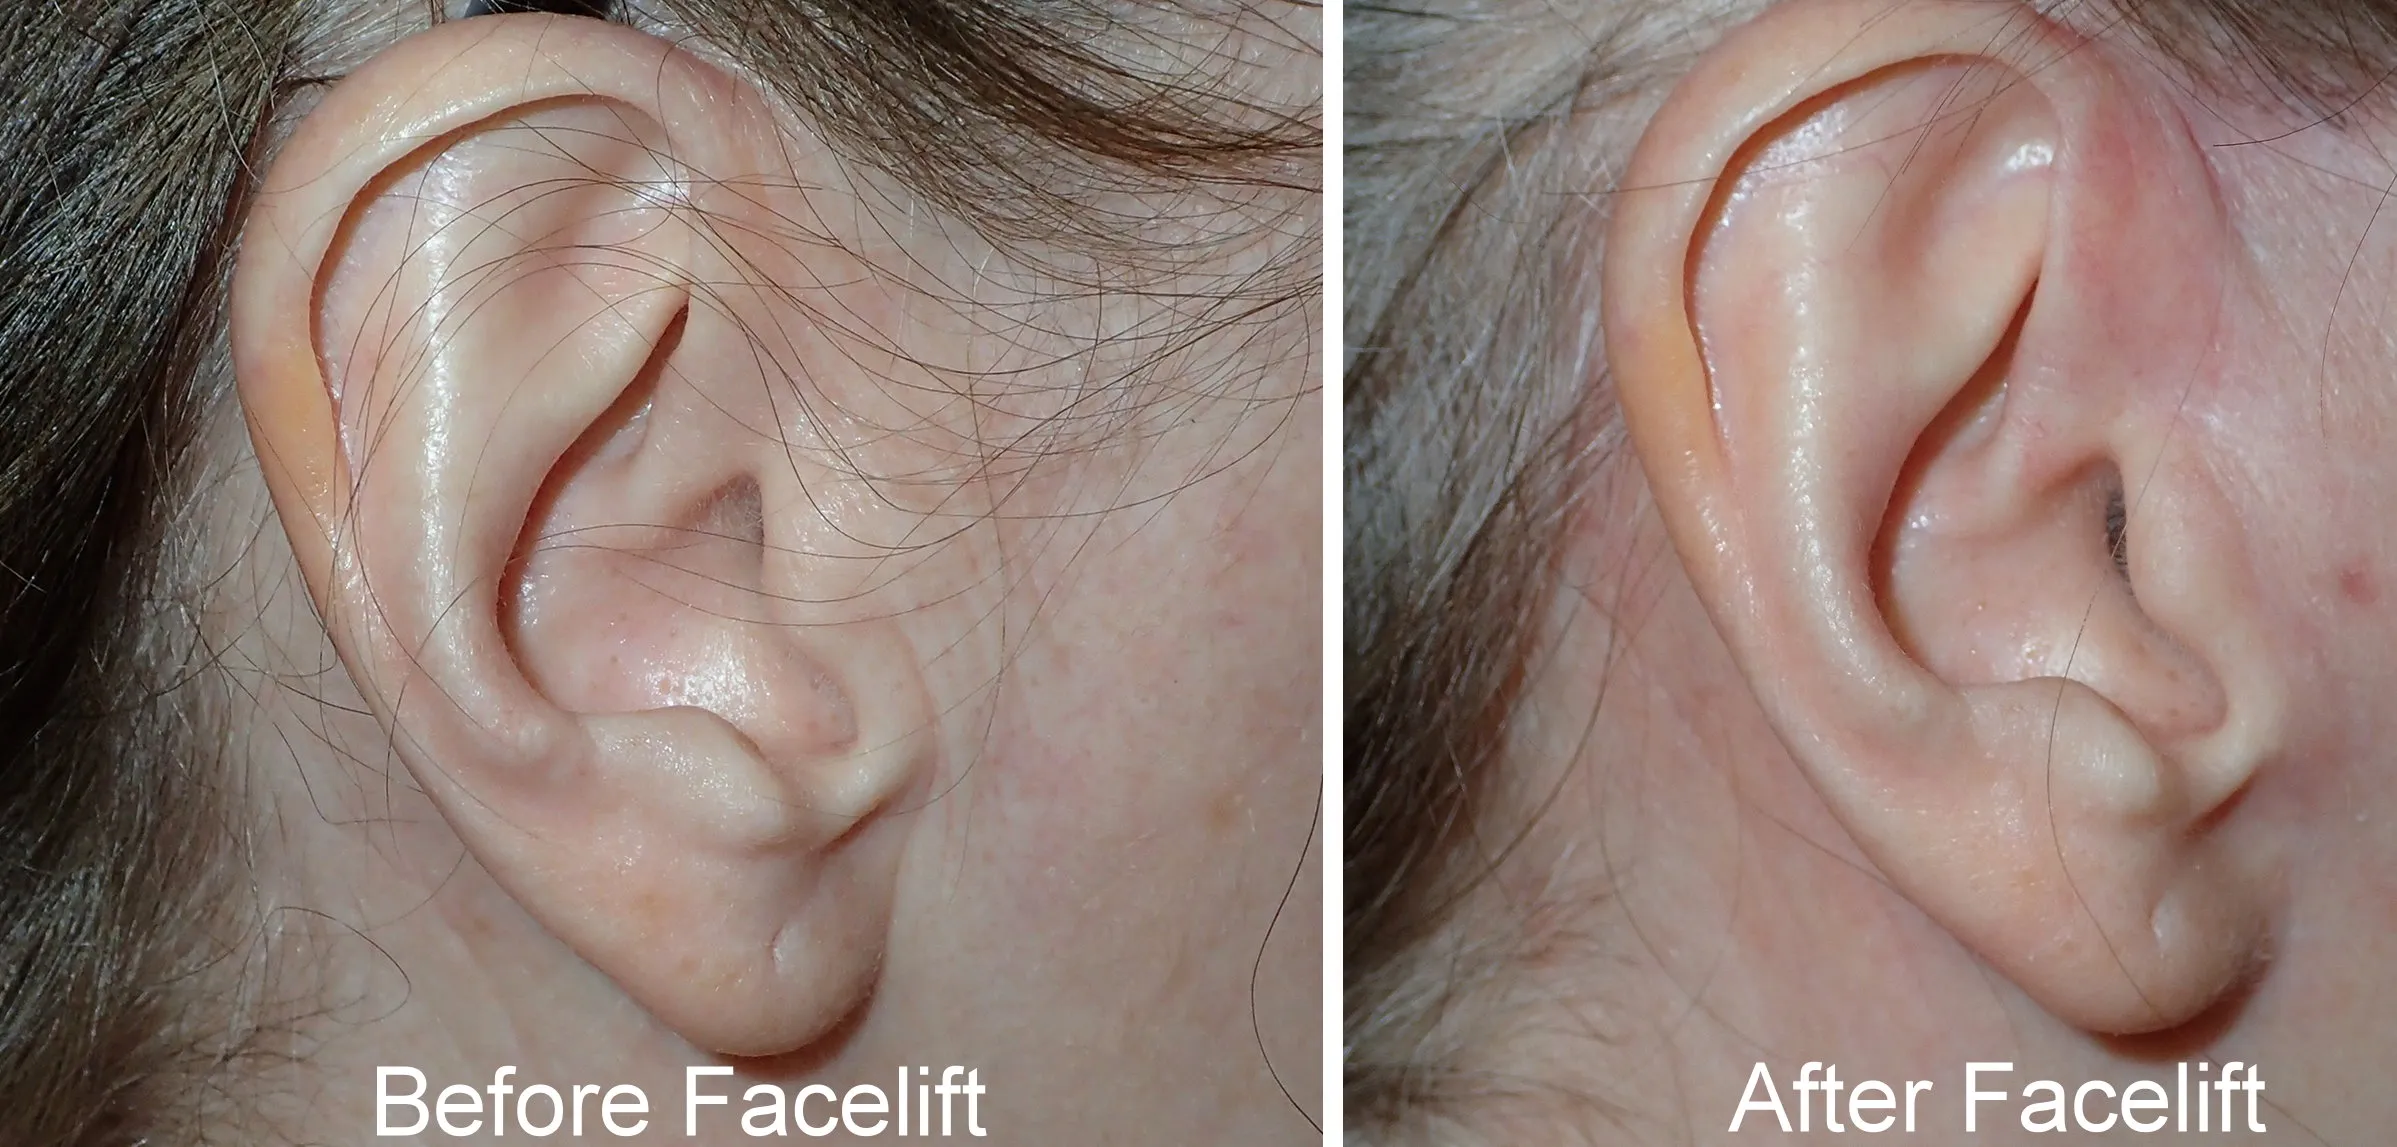 before and after pictures of typical facelift incisions performed by Dr. Niamtu